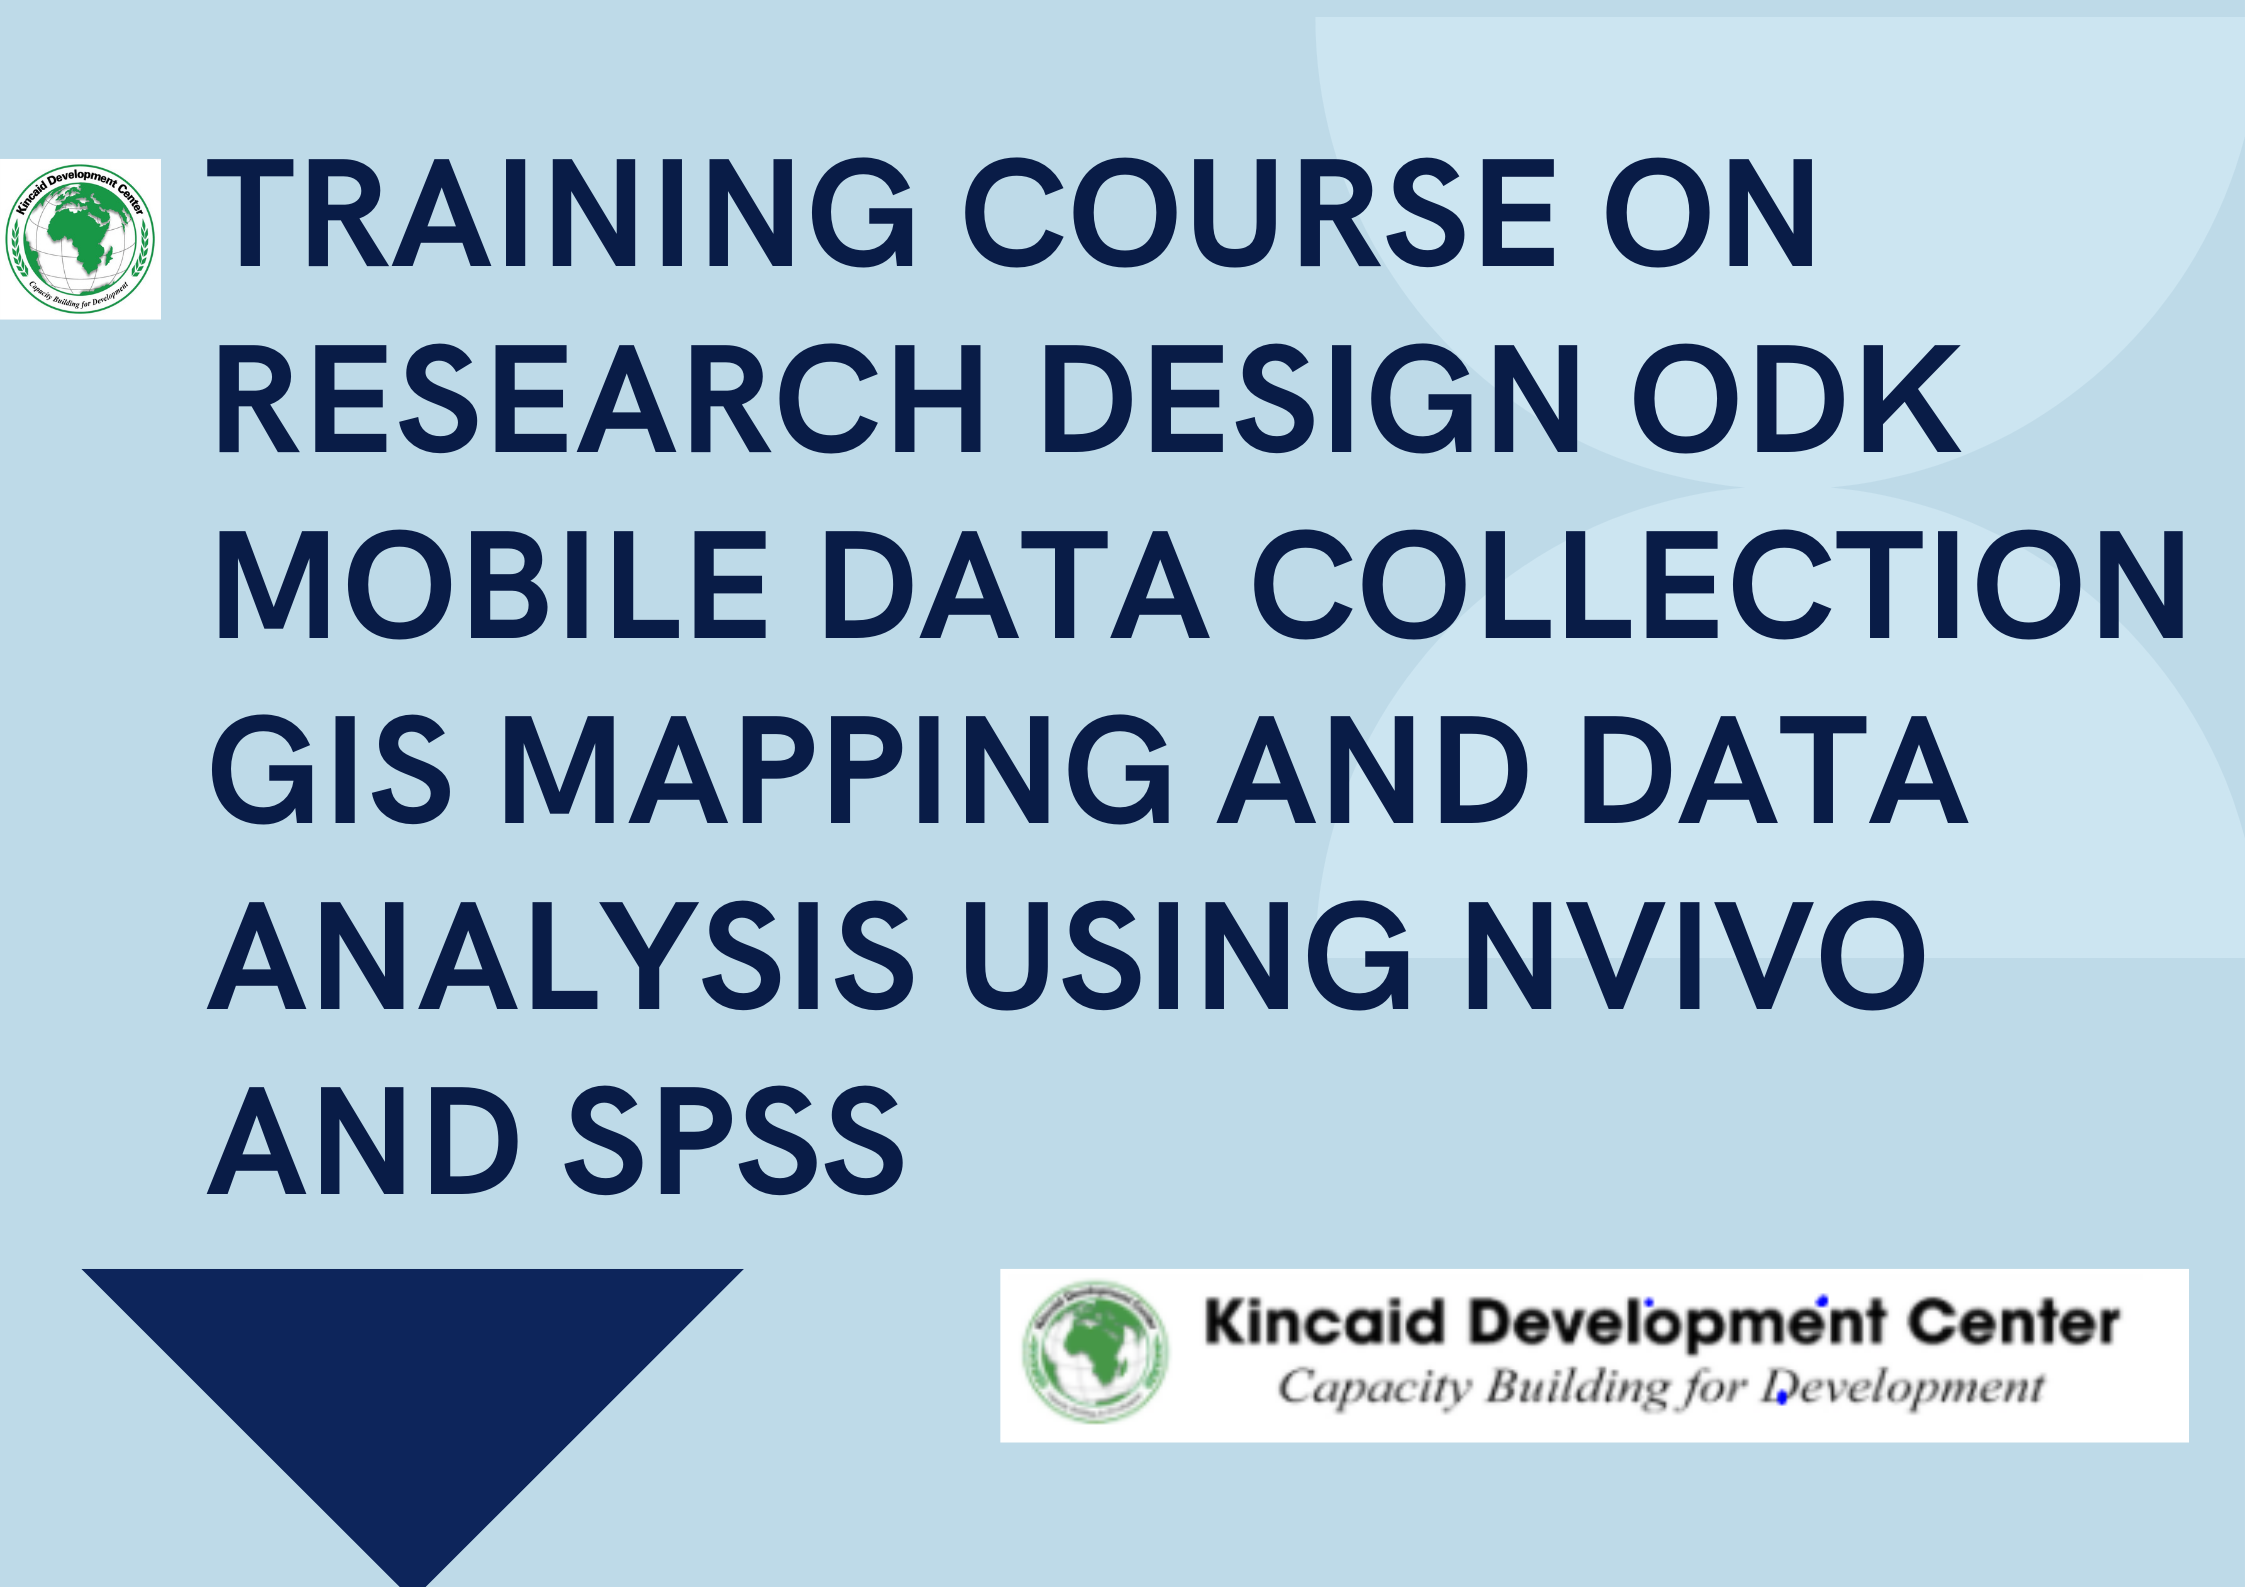 TRAINING COURSE ON RESEARCH DESIGN ODK MOBILE DATA COLLECTION GIS MAPPING AND DATA ANALYSIS USING NVIVO AND SPSS, Nairobi, Kenya